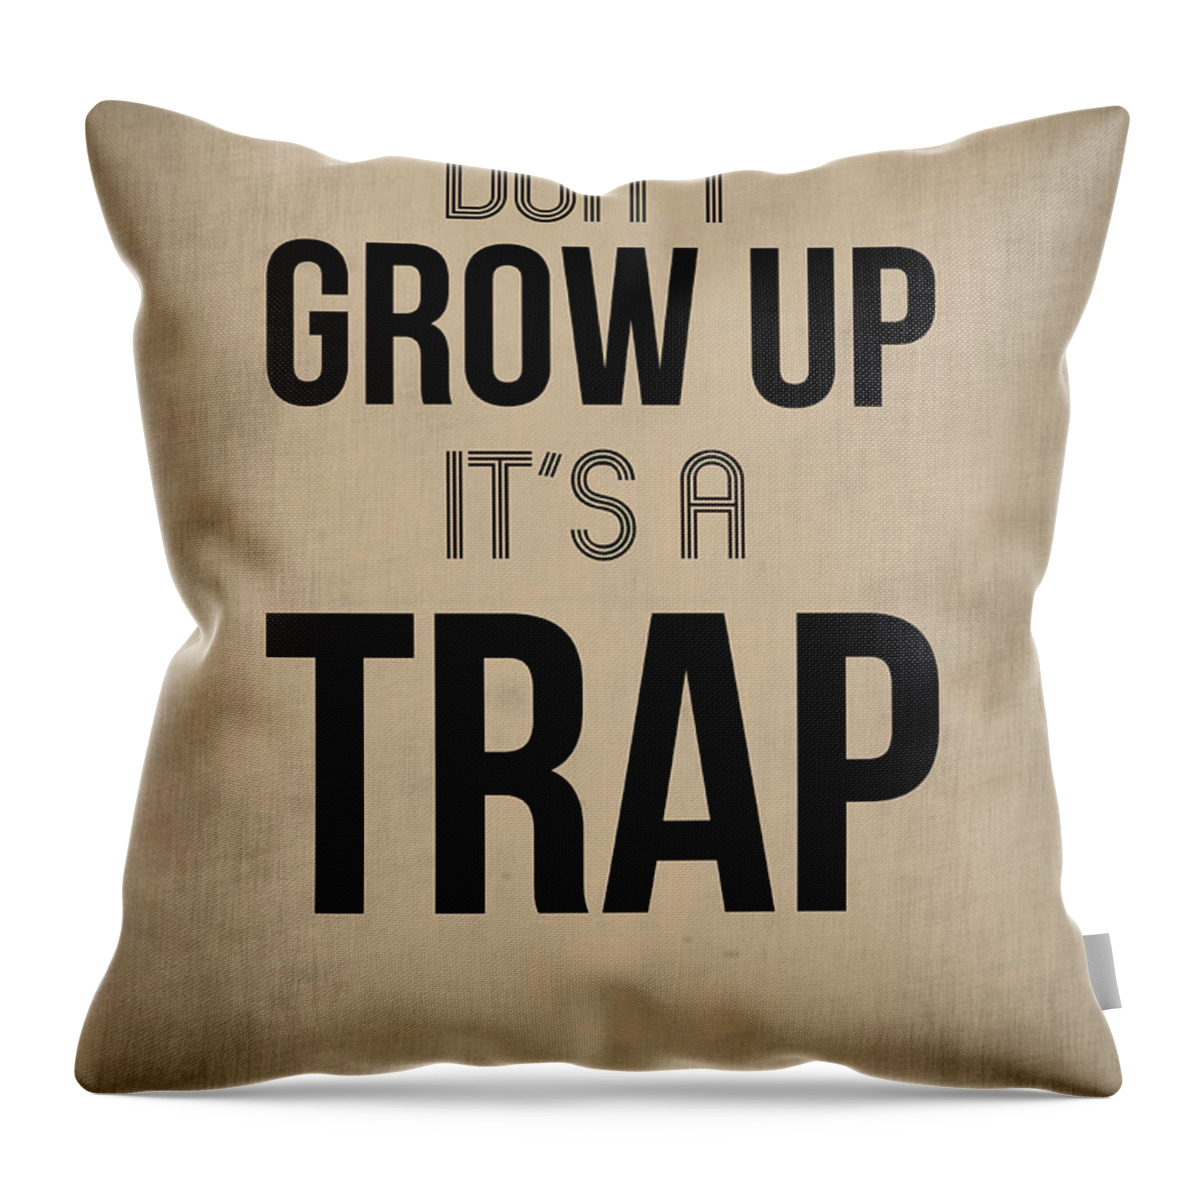 Motivational Throw Pillow featuring the digital art Don't Grow Up It's a Trap 2 by Naxart Studio